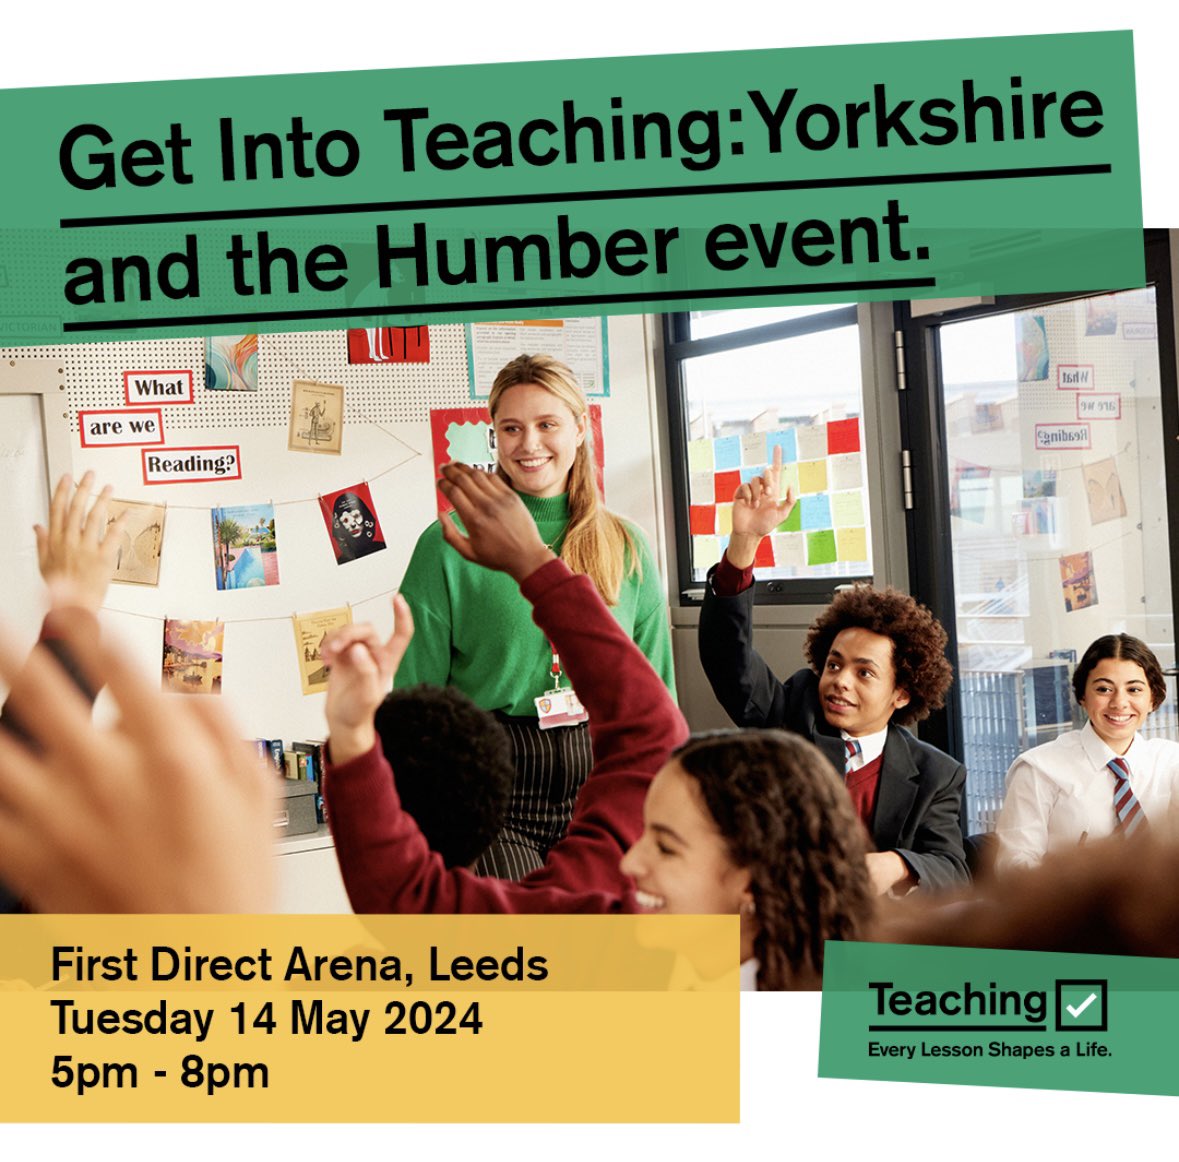 Are you thinking about a career in teaching? Join us at this event on 14 May to find out why you should train to teach with @DixonsAcademies. We’re looking forward to meeting you. #getintoteaching